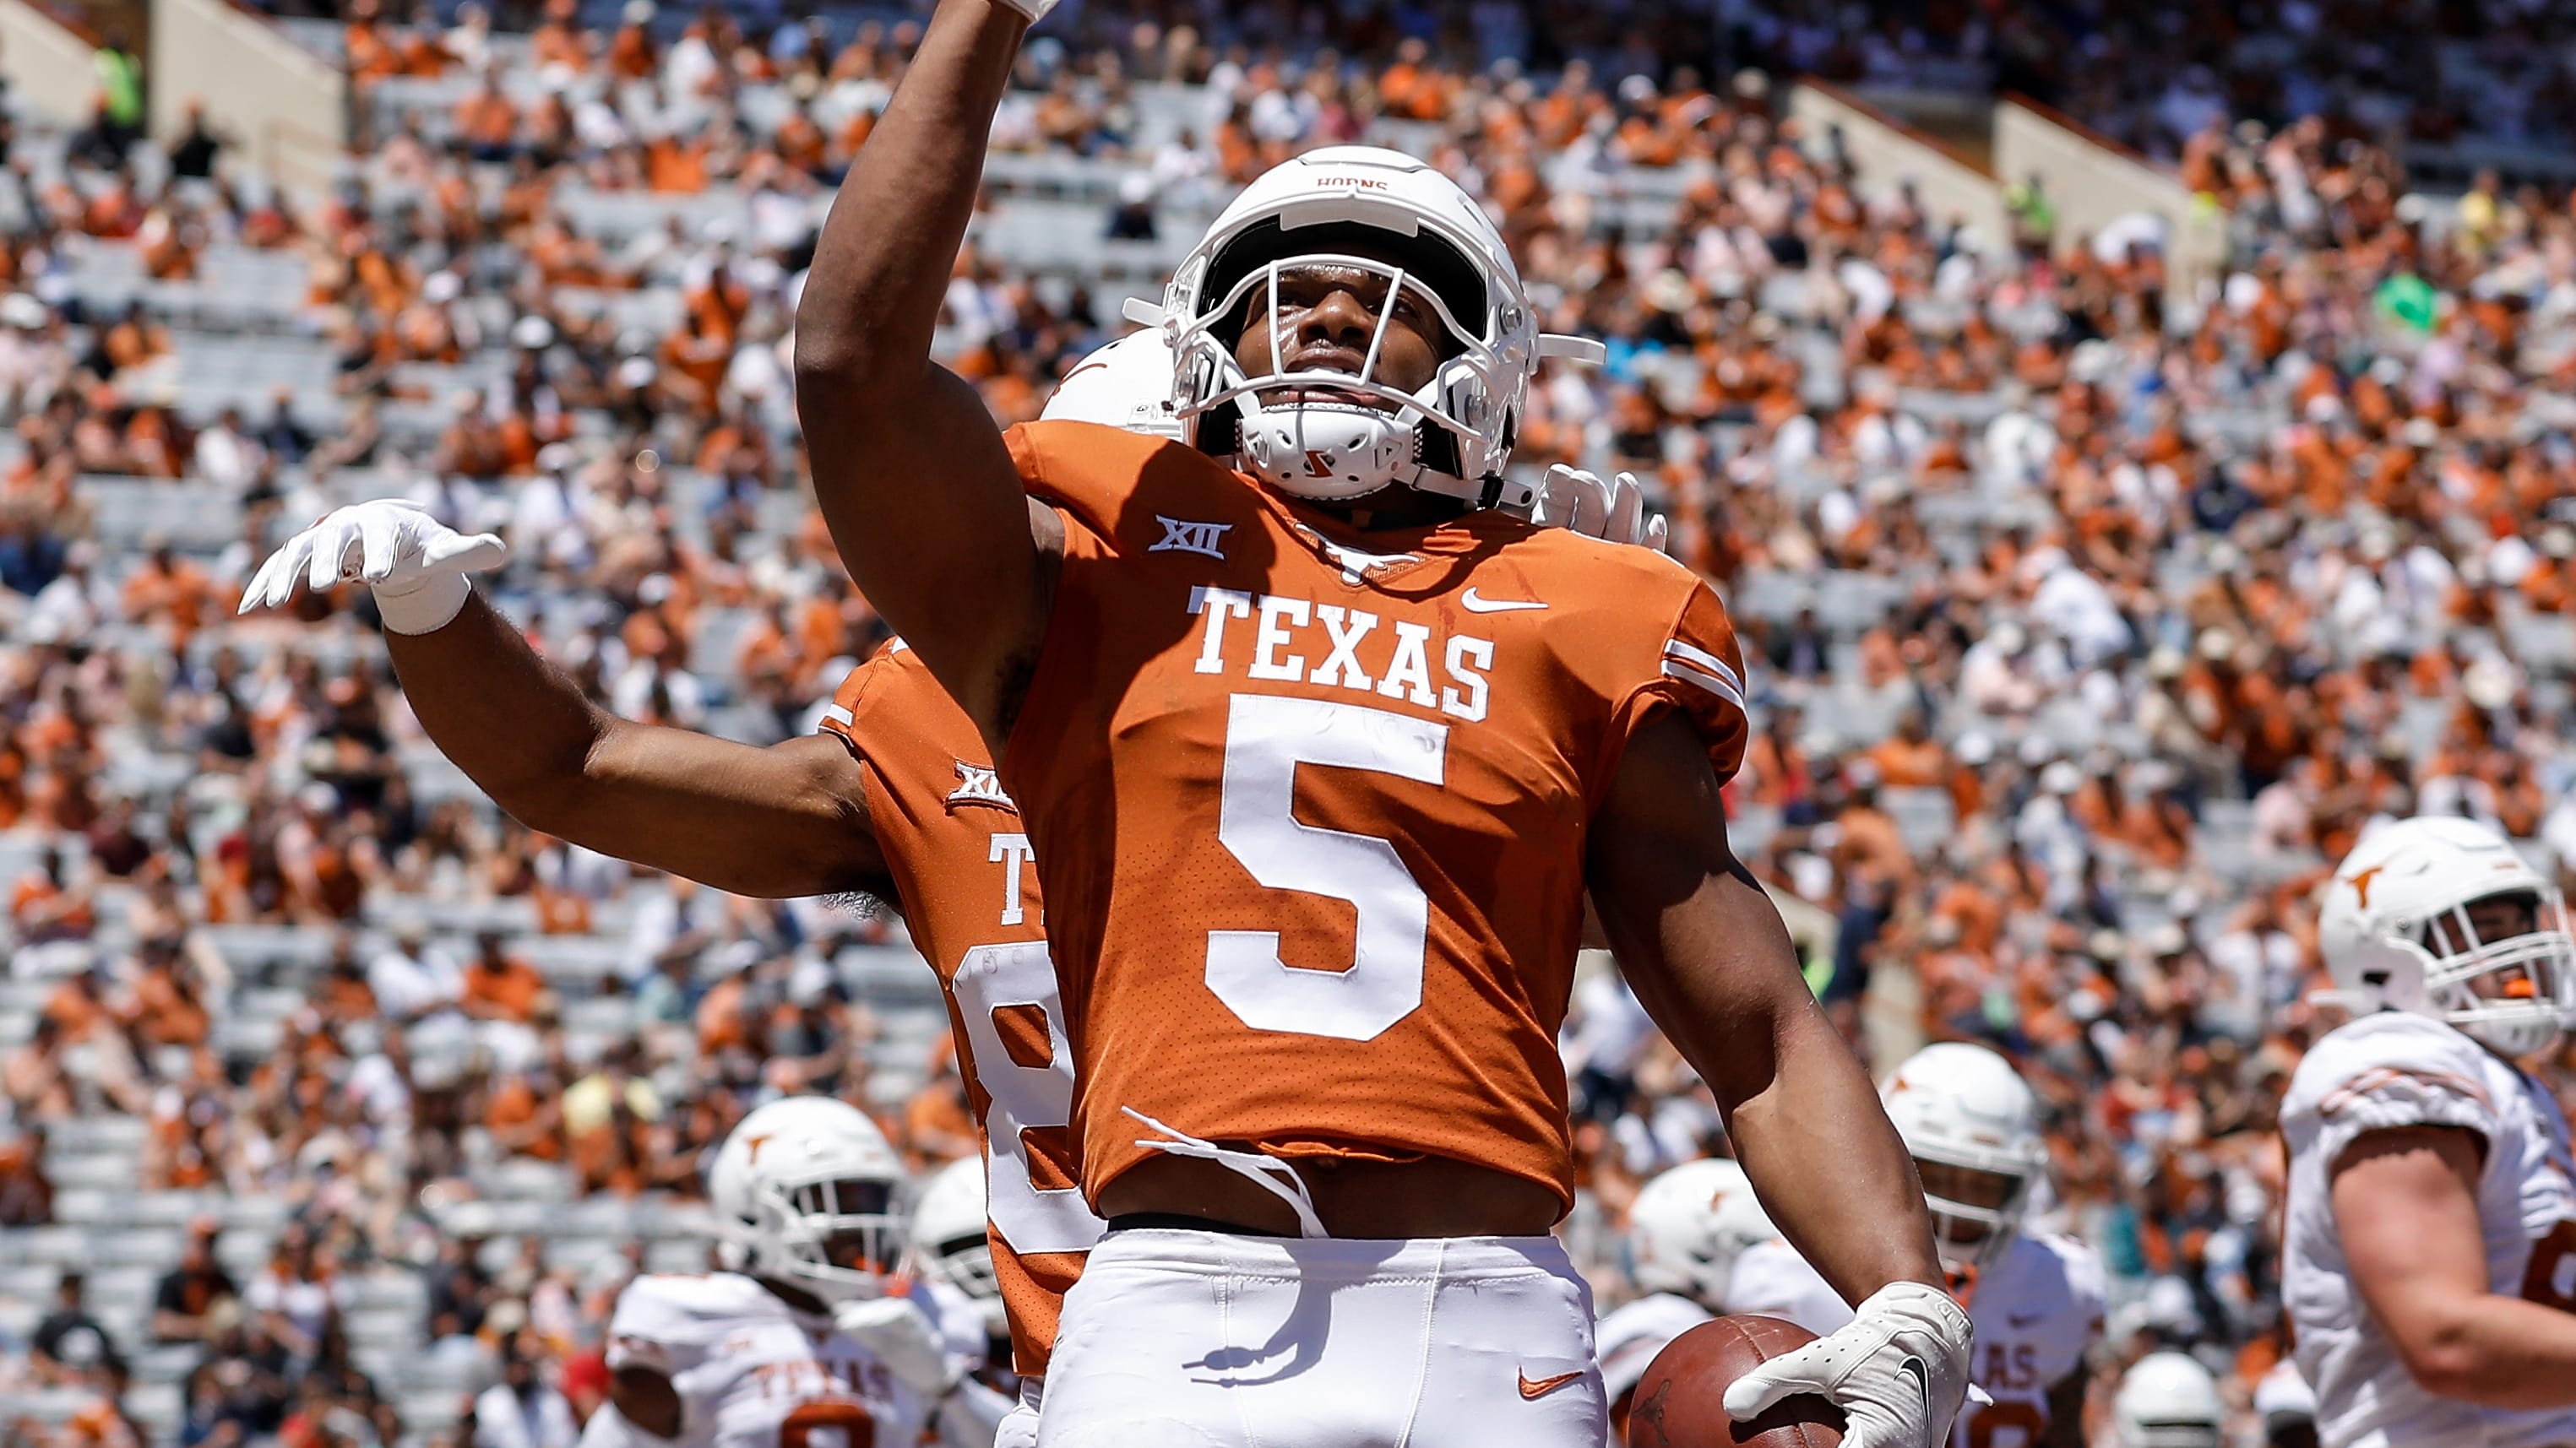 2021 Texas Win Total: Odds, Betting Trends, & Over/Under